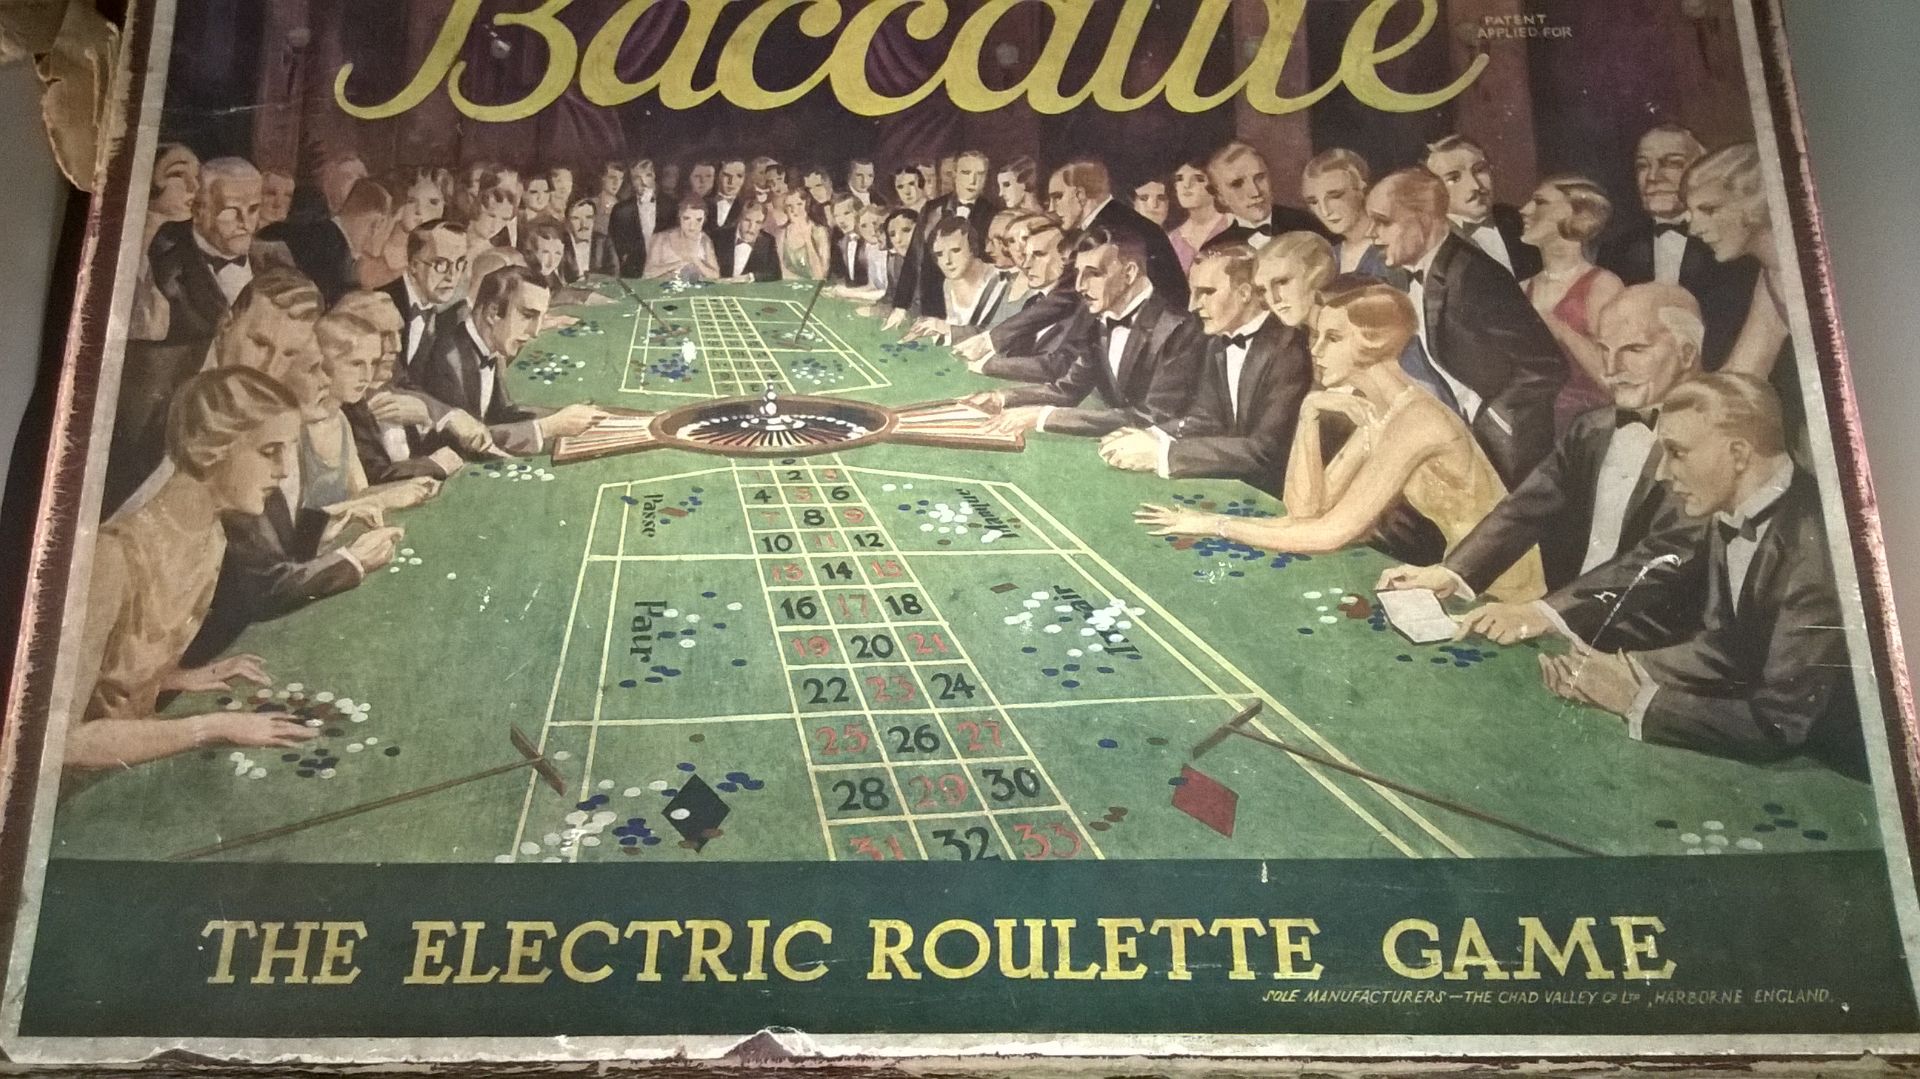 VINTAGE CHAD VALLEY BACCALITE GAME FROM 1920s - THE ELECTRIC ROULETTE - PATENT APPLIED FOR Vintage